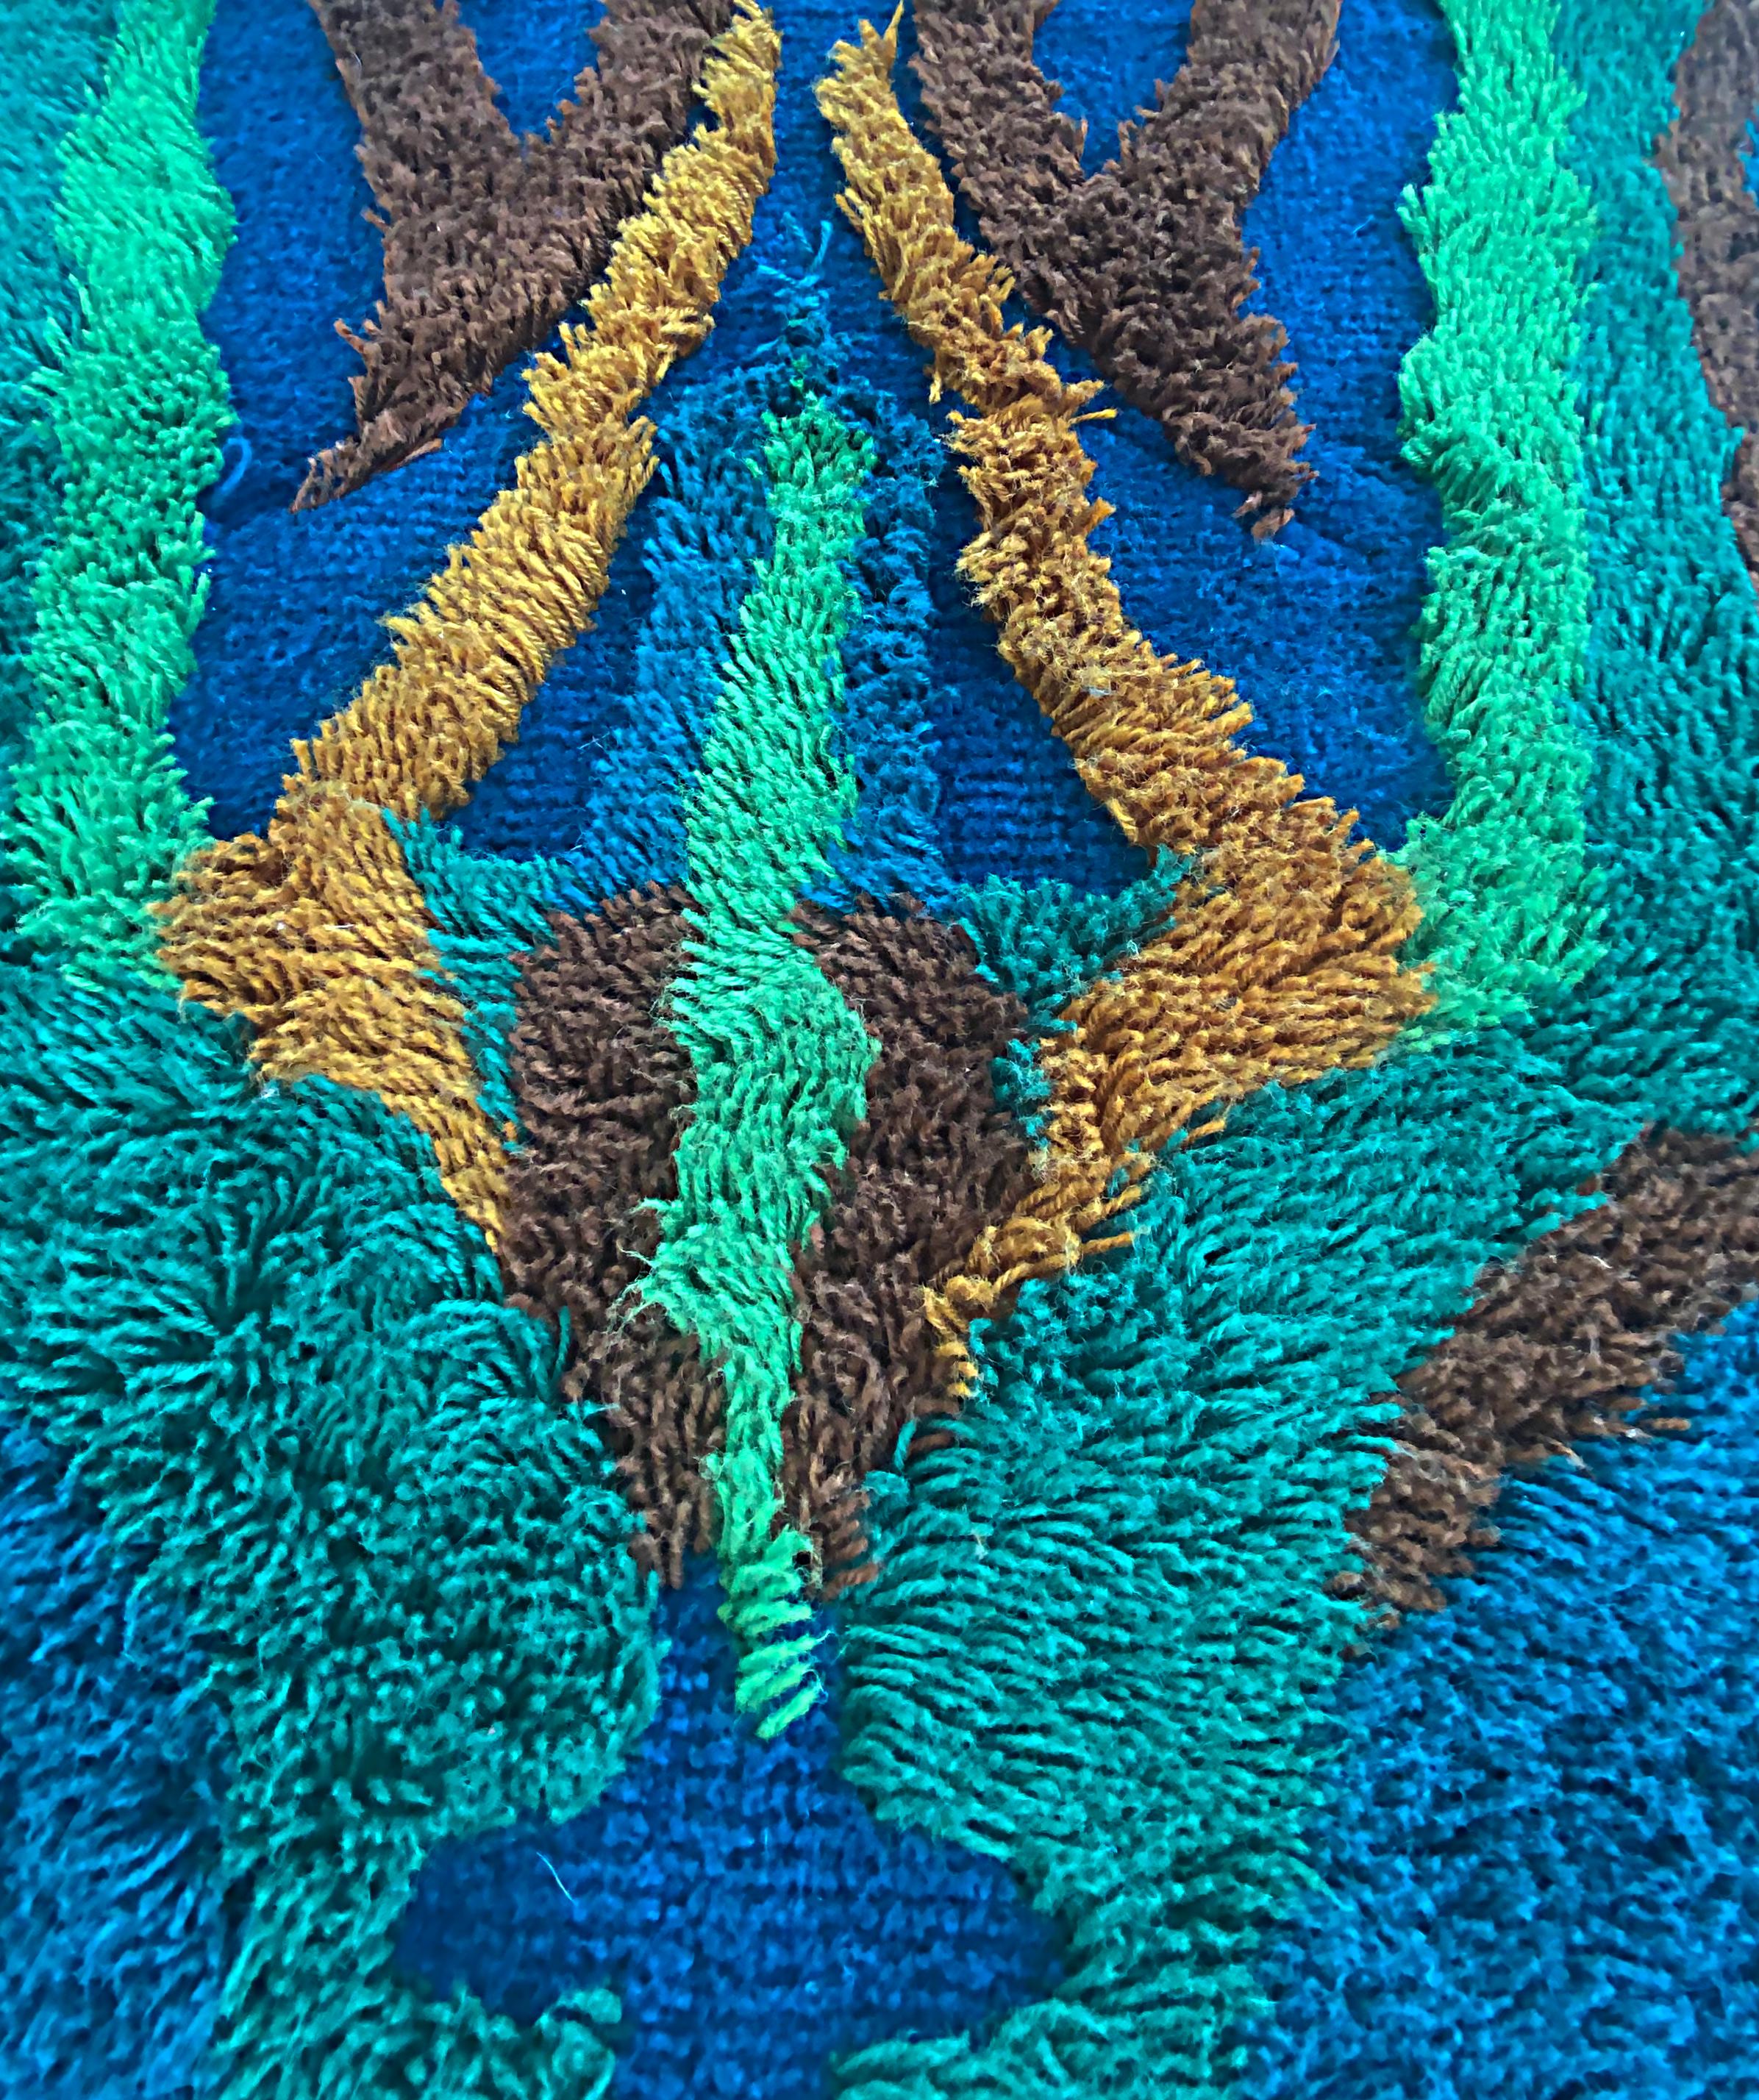 Scandinavian Modern Danish Rya Rug with Vibrant Colors and Earth Tones 

Offered for sale is a Scandinavian Modern Danish Rya wool rug circa 1975. The rug has great textures and bright vibrant colors including shades of greens, blues, and browns.